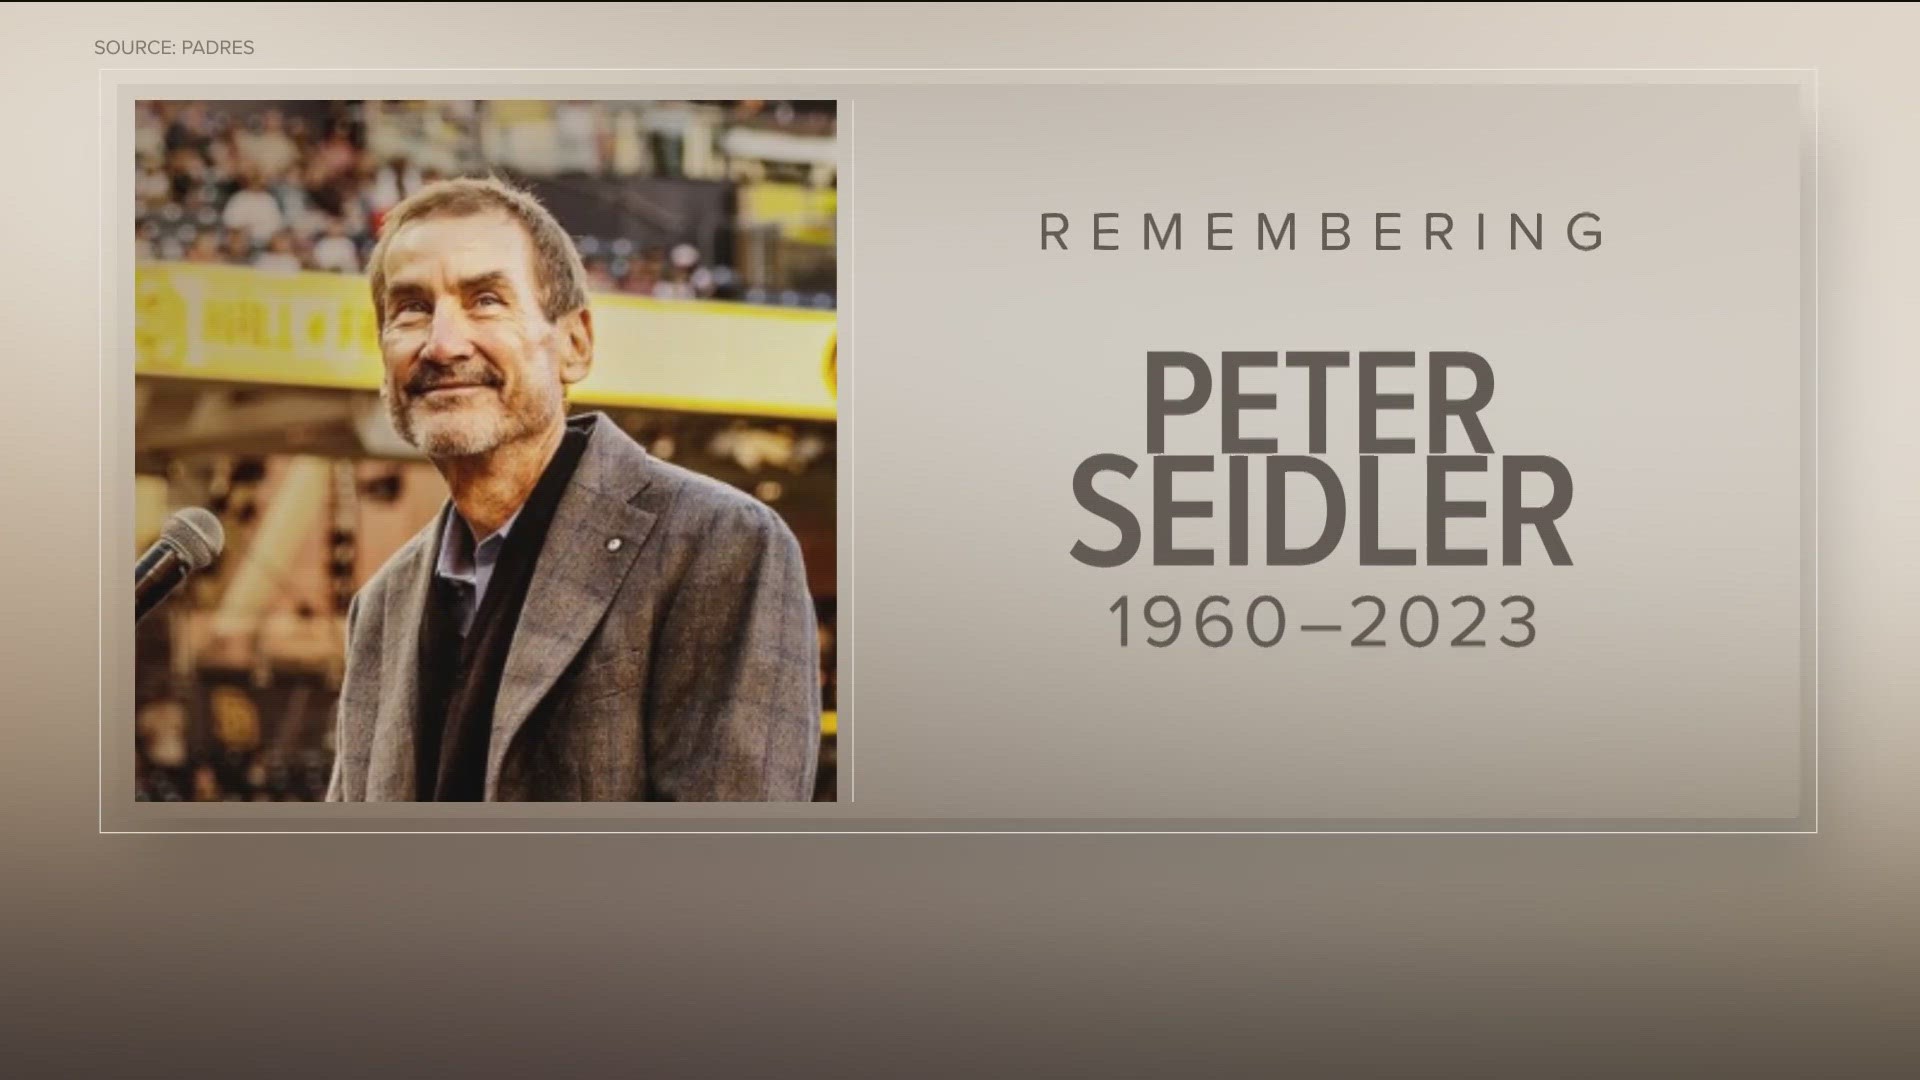 Fans mourn the loss of the Padres' Chairman and Owner, Peter Seidler, after his death on Tuesday.